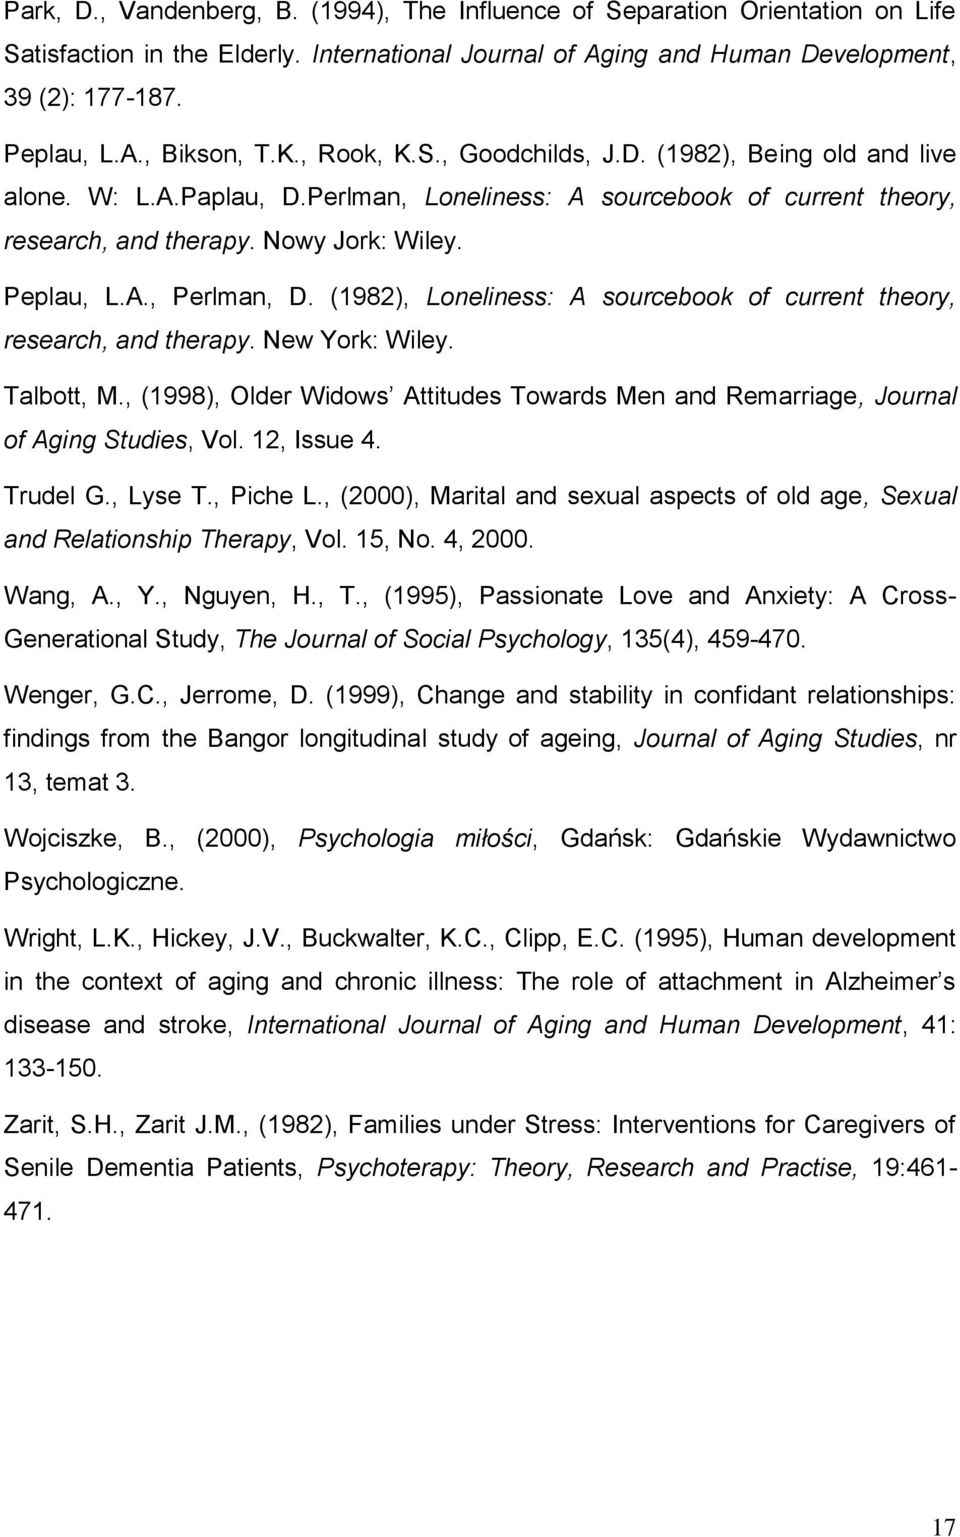 (1982), Loneliness: A sourcebook of current theory, research, and therapy. New York: Wiley. Talbott, M., (1998), Older Widows Attitudes Towards Men and Remarriage, Journal of Aging Studies, Vol.